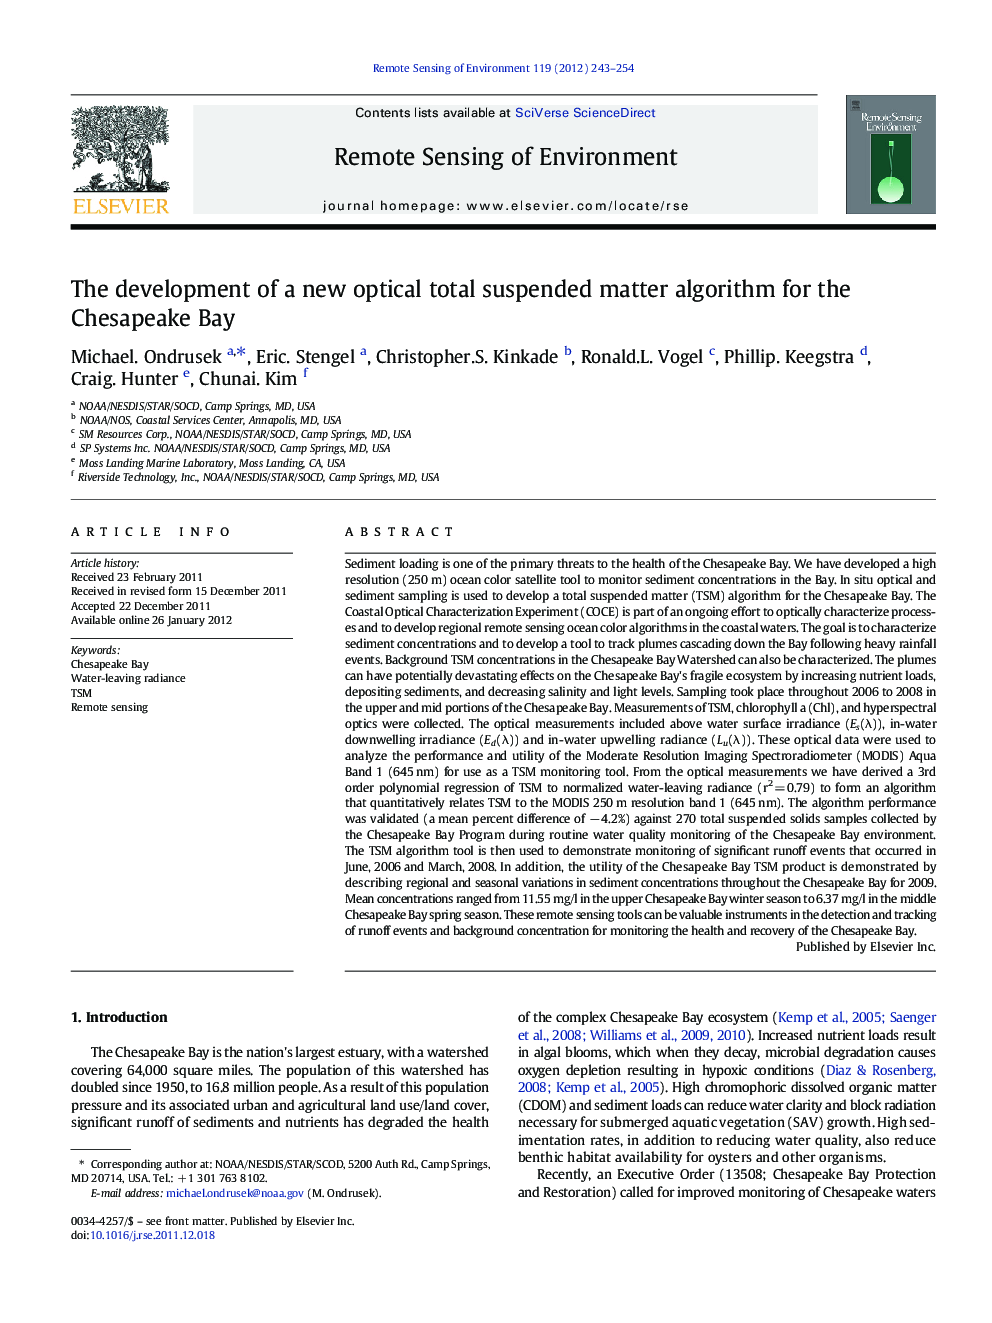 The development of a new optical total suspended matter algorithm for the Chesapeake Bay